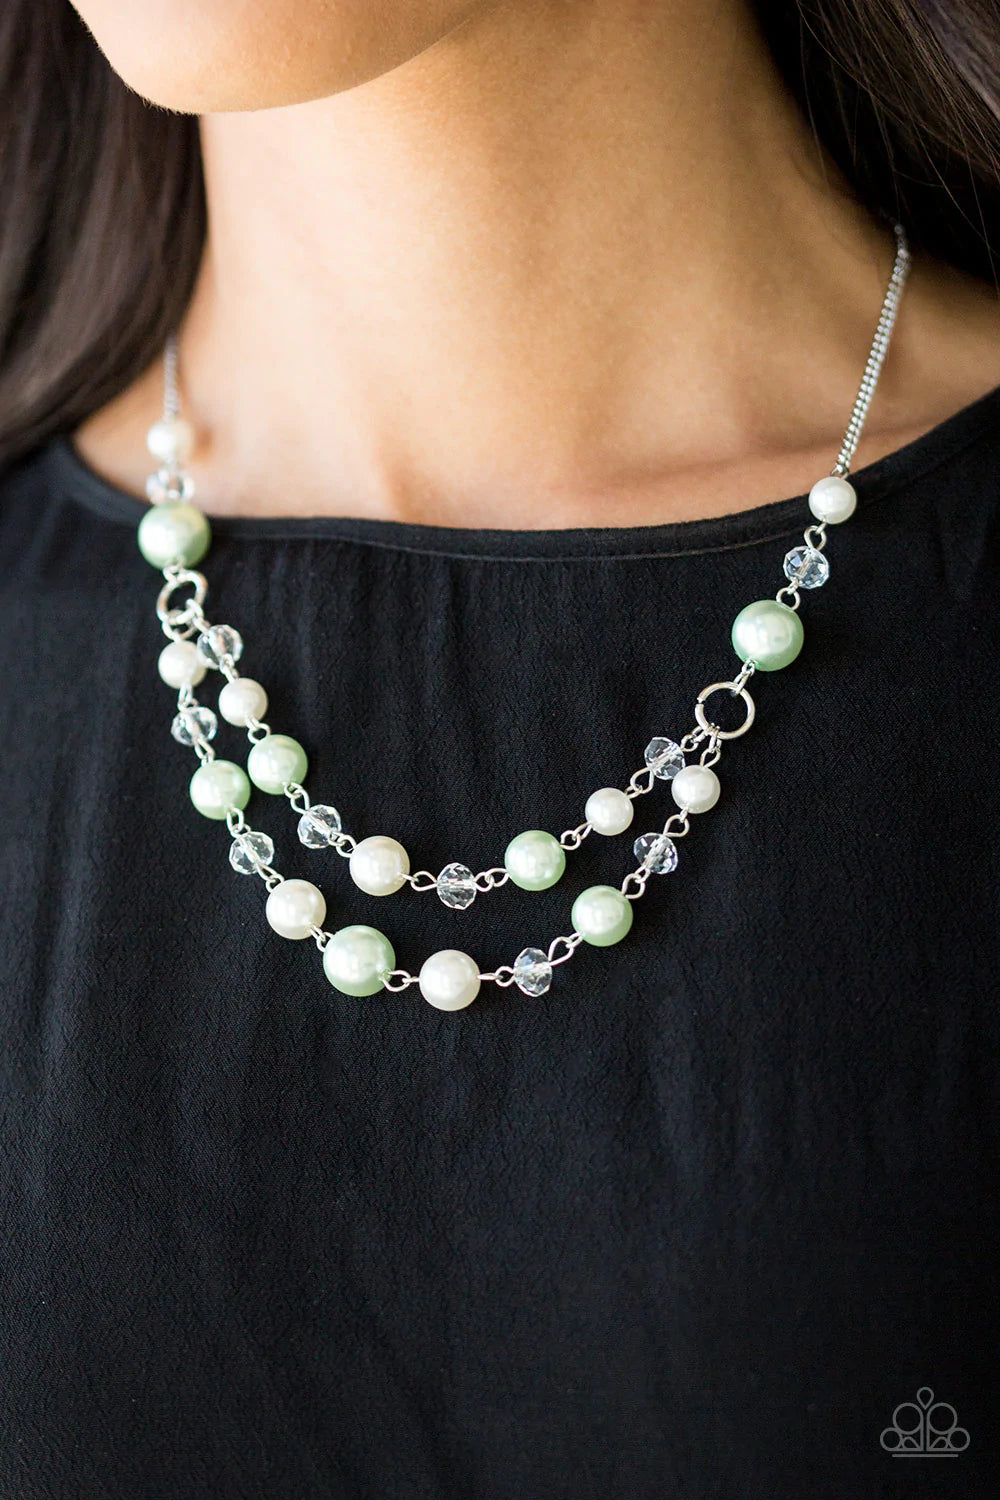 Vintage Paparazzi “The Princess Bridesmaid” Multi Green and White Pearly Necklace